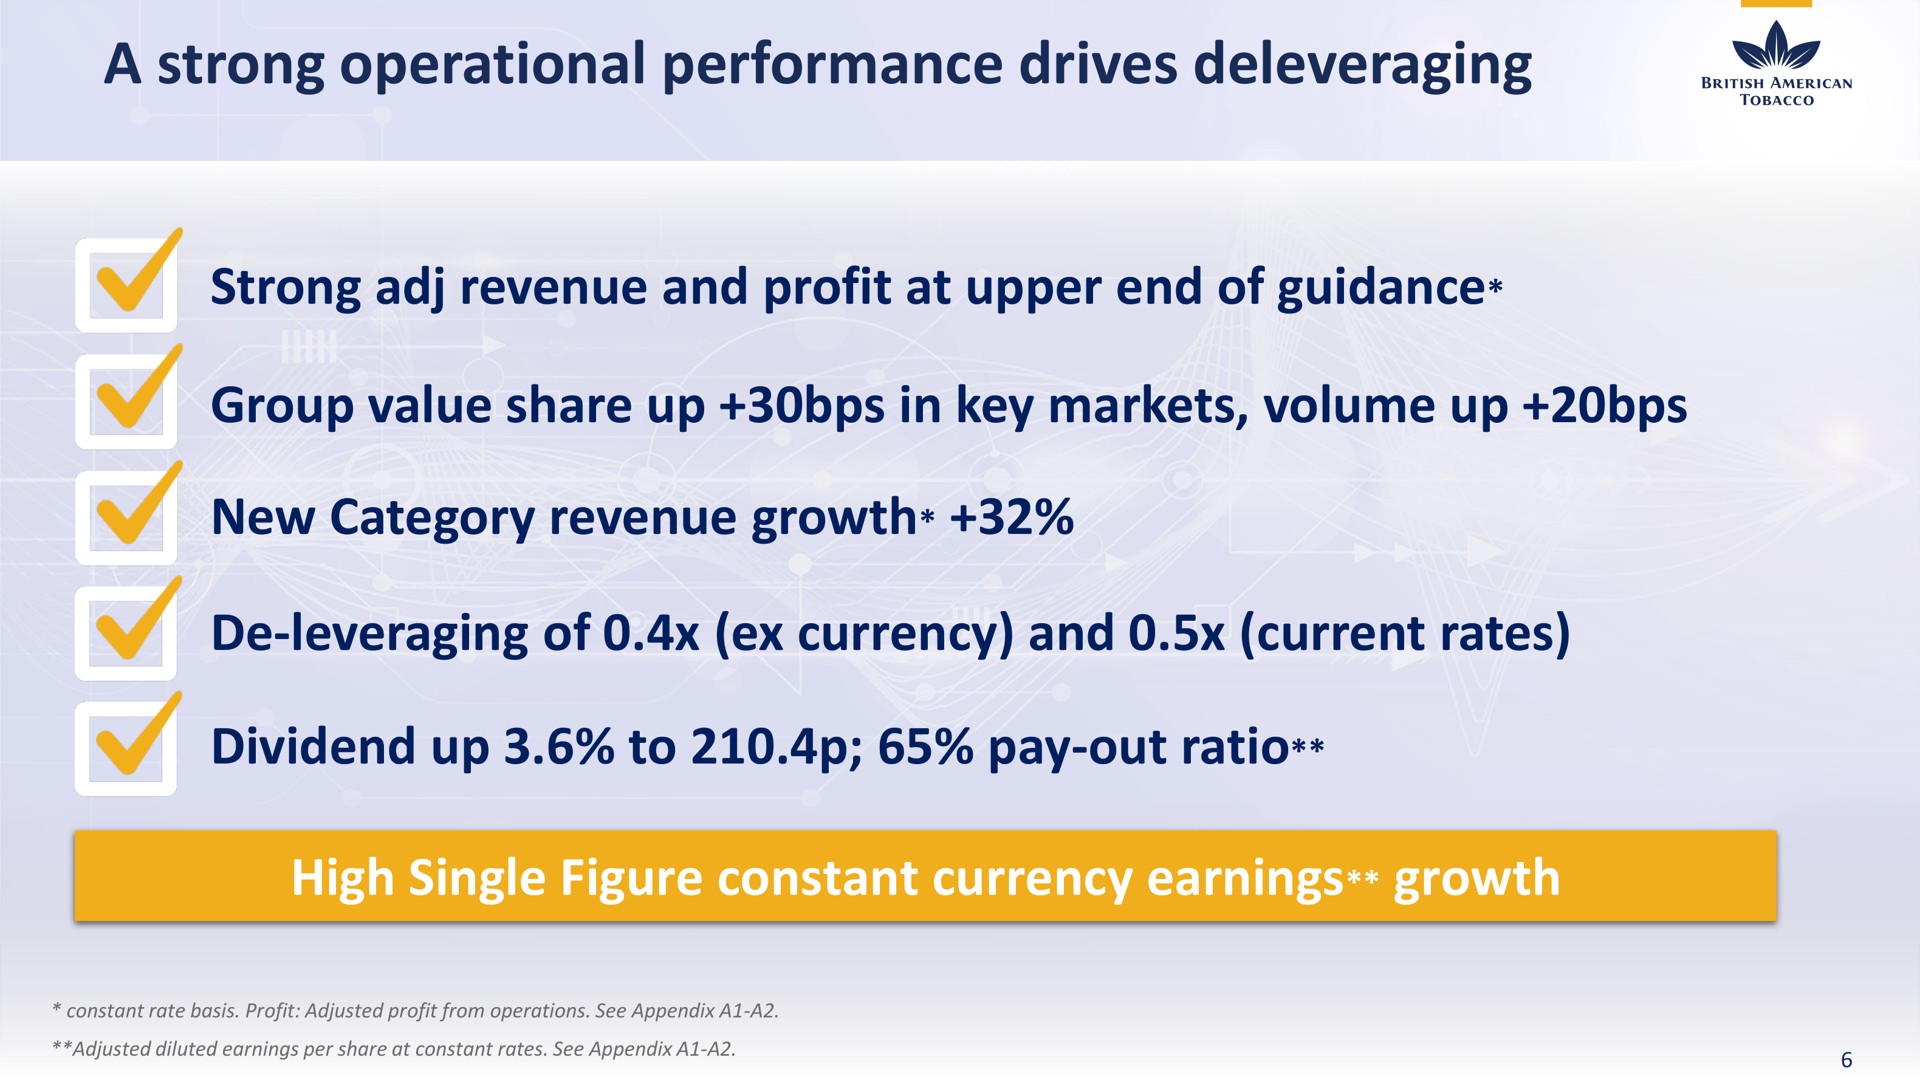 a strong operational performance drives revenue and profit at upper end of guidance group value share up in key markets volume up new category revenue growth leveraging of currency and current rates dividend up to pay out ratio | BAT